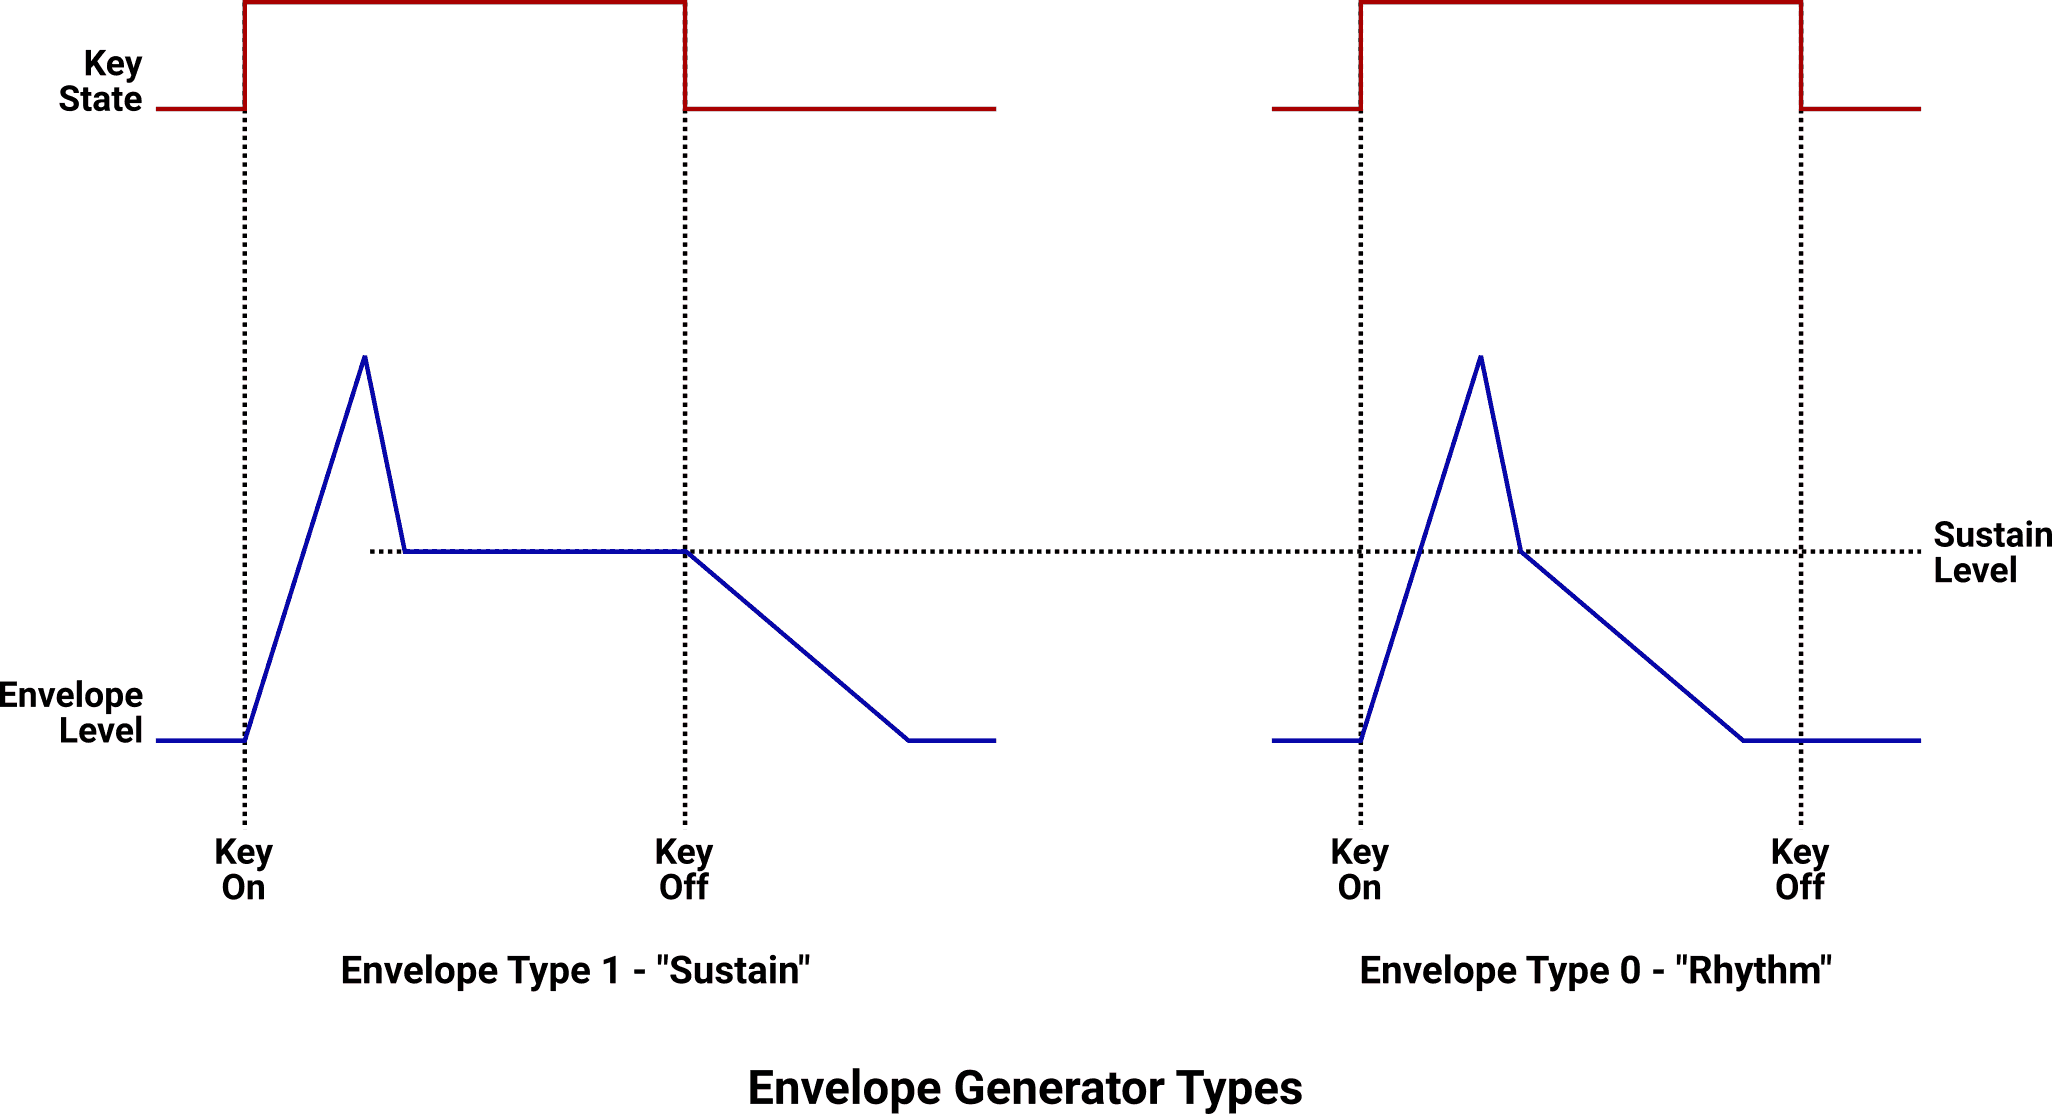 Comparison of Type 1 (Sustain) and Type 0 (Rhythm) envelope generator types.